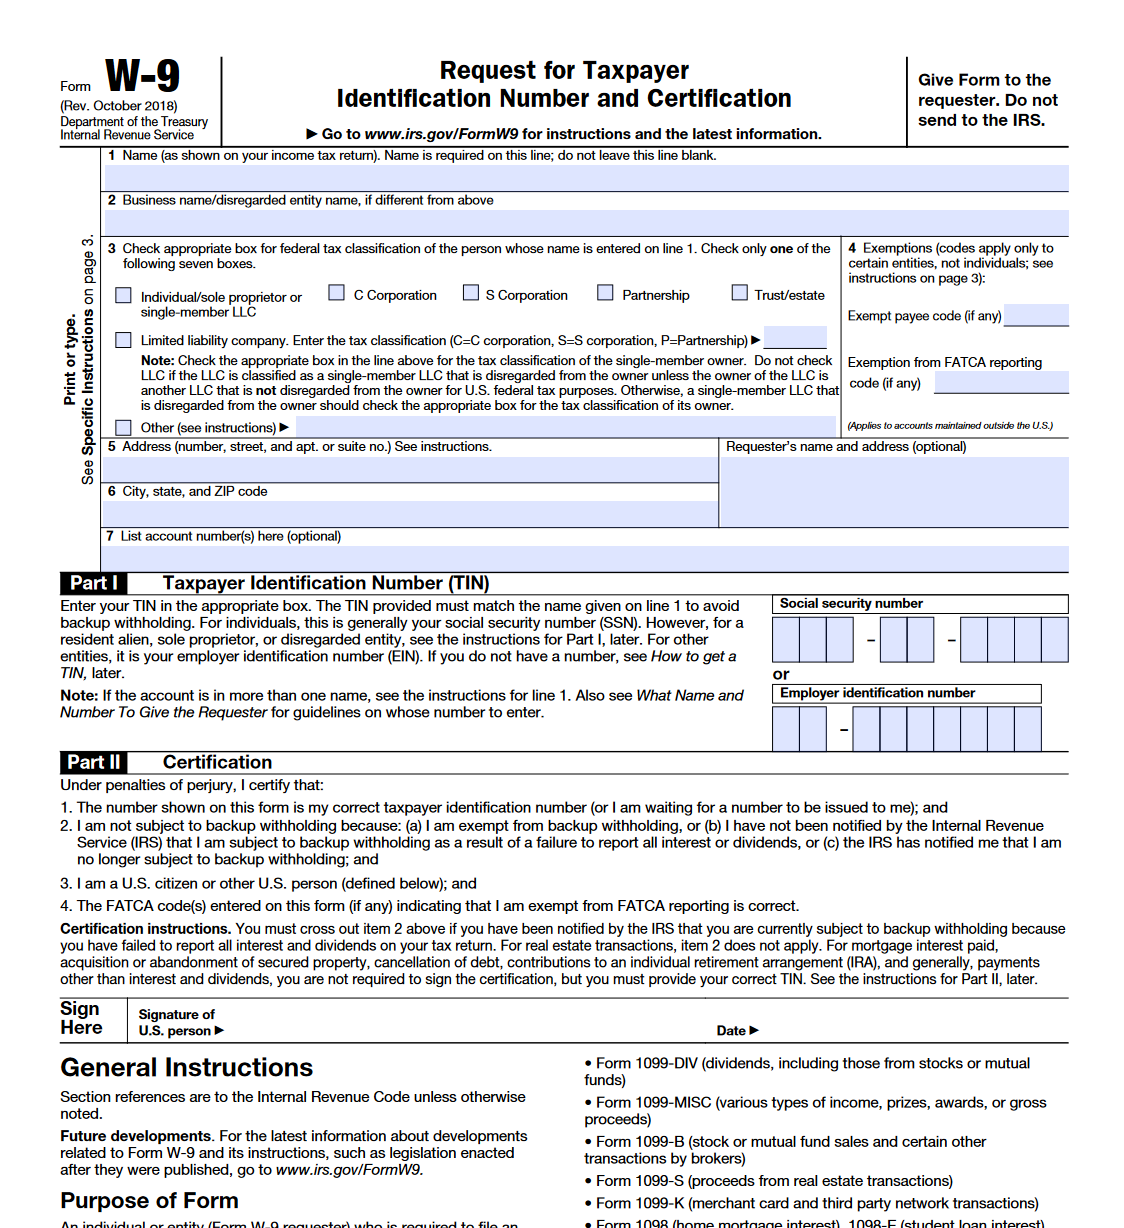 Irs Form W 9 Request For Taxpayer Identification Number And